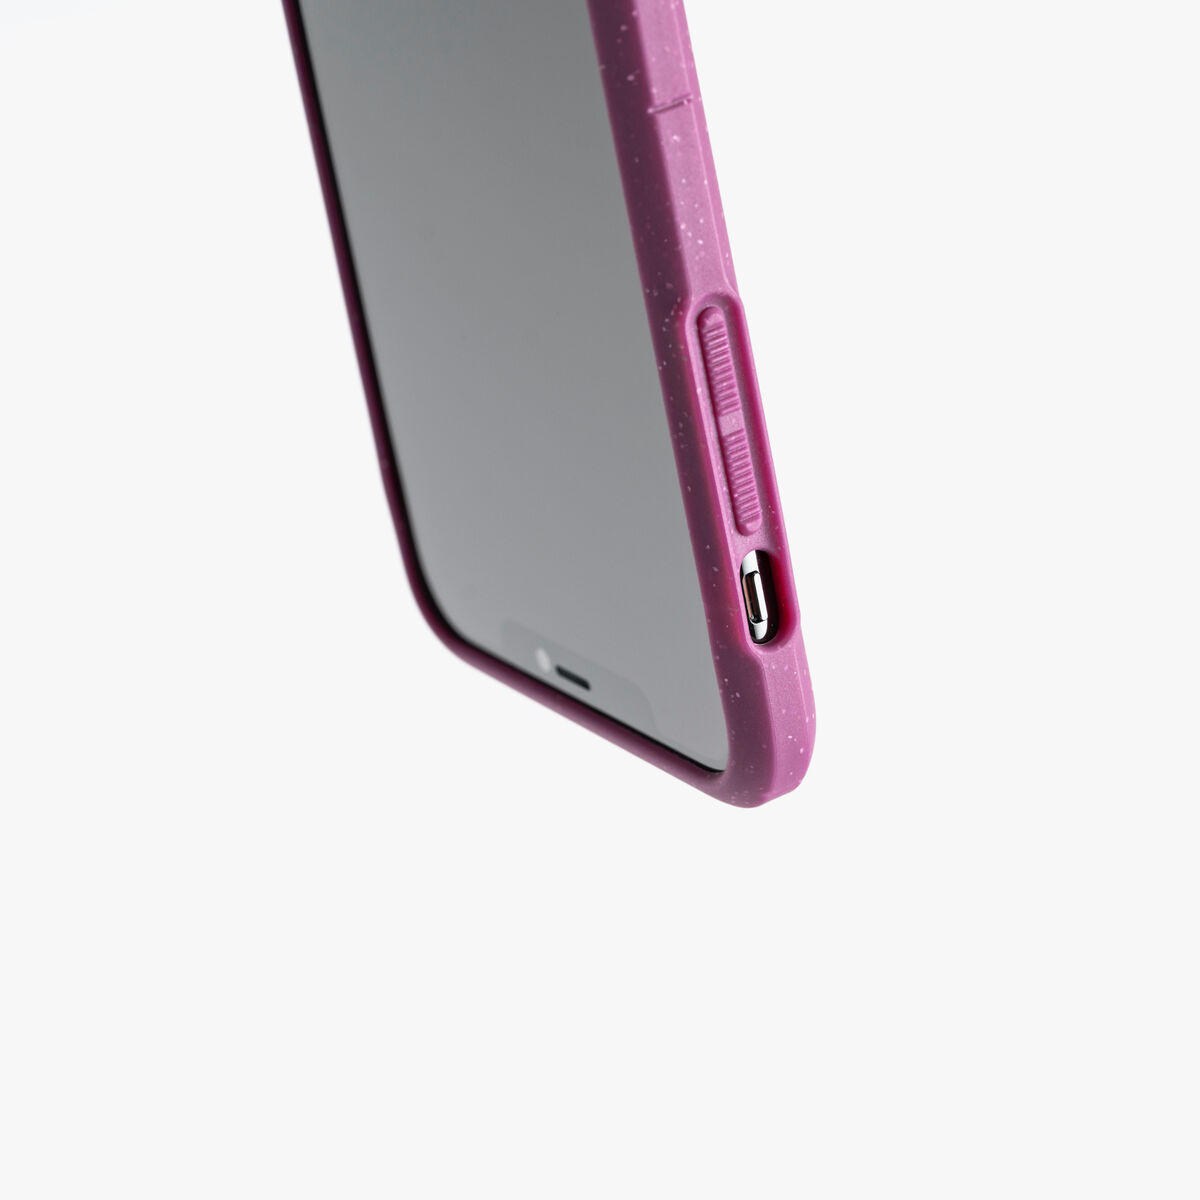 Moab Case (Berry) for Apple iPhone 11 Pro,, large